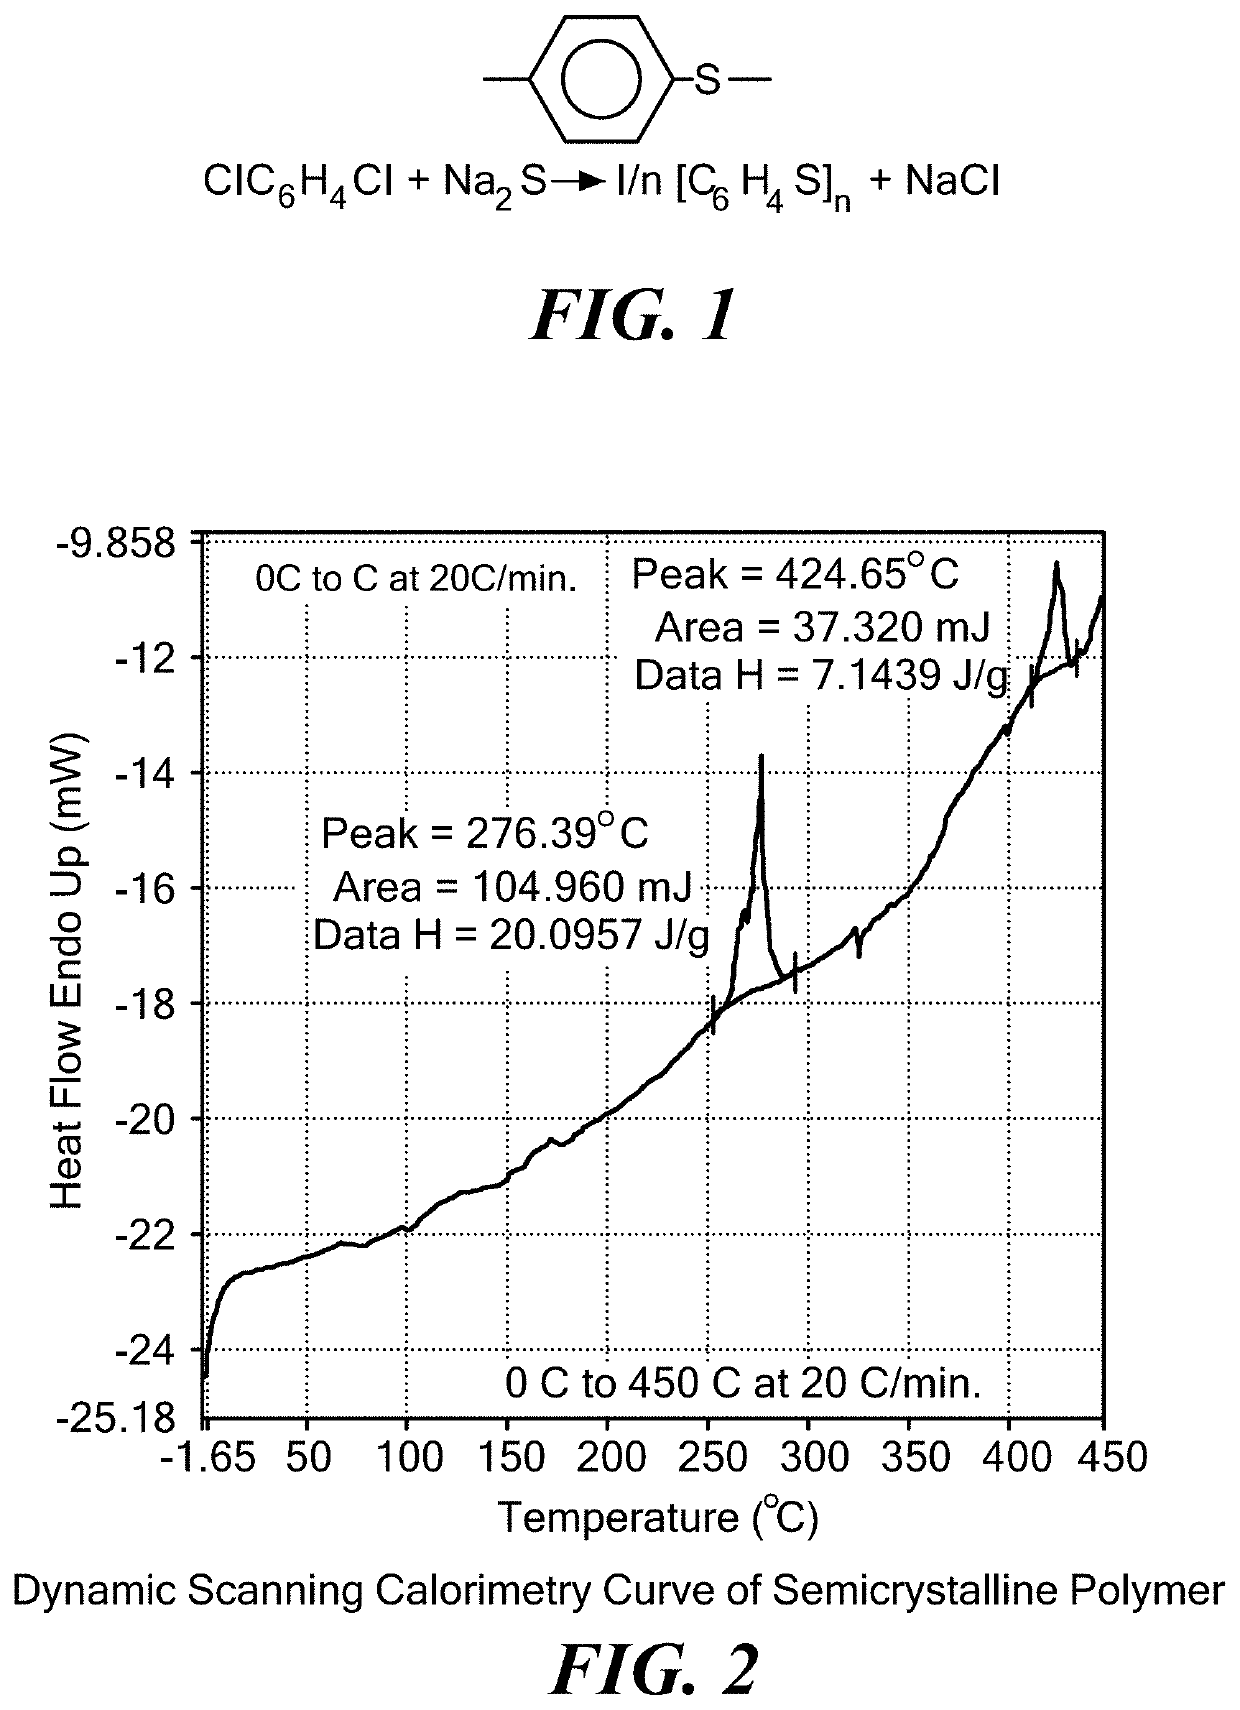 Electrochemical cell having solid ionically conducting polymer material